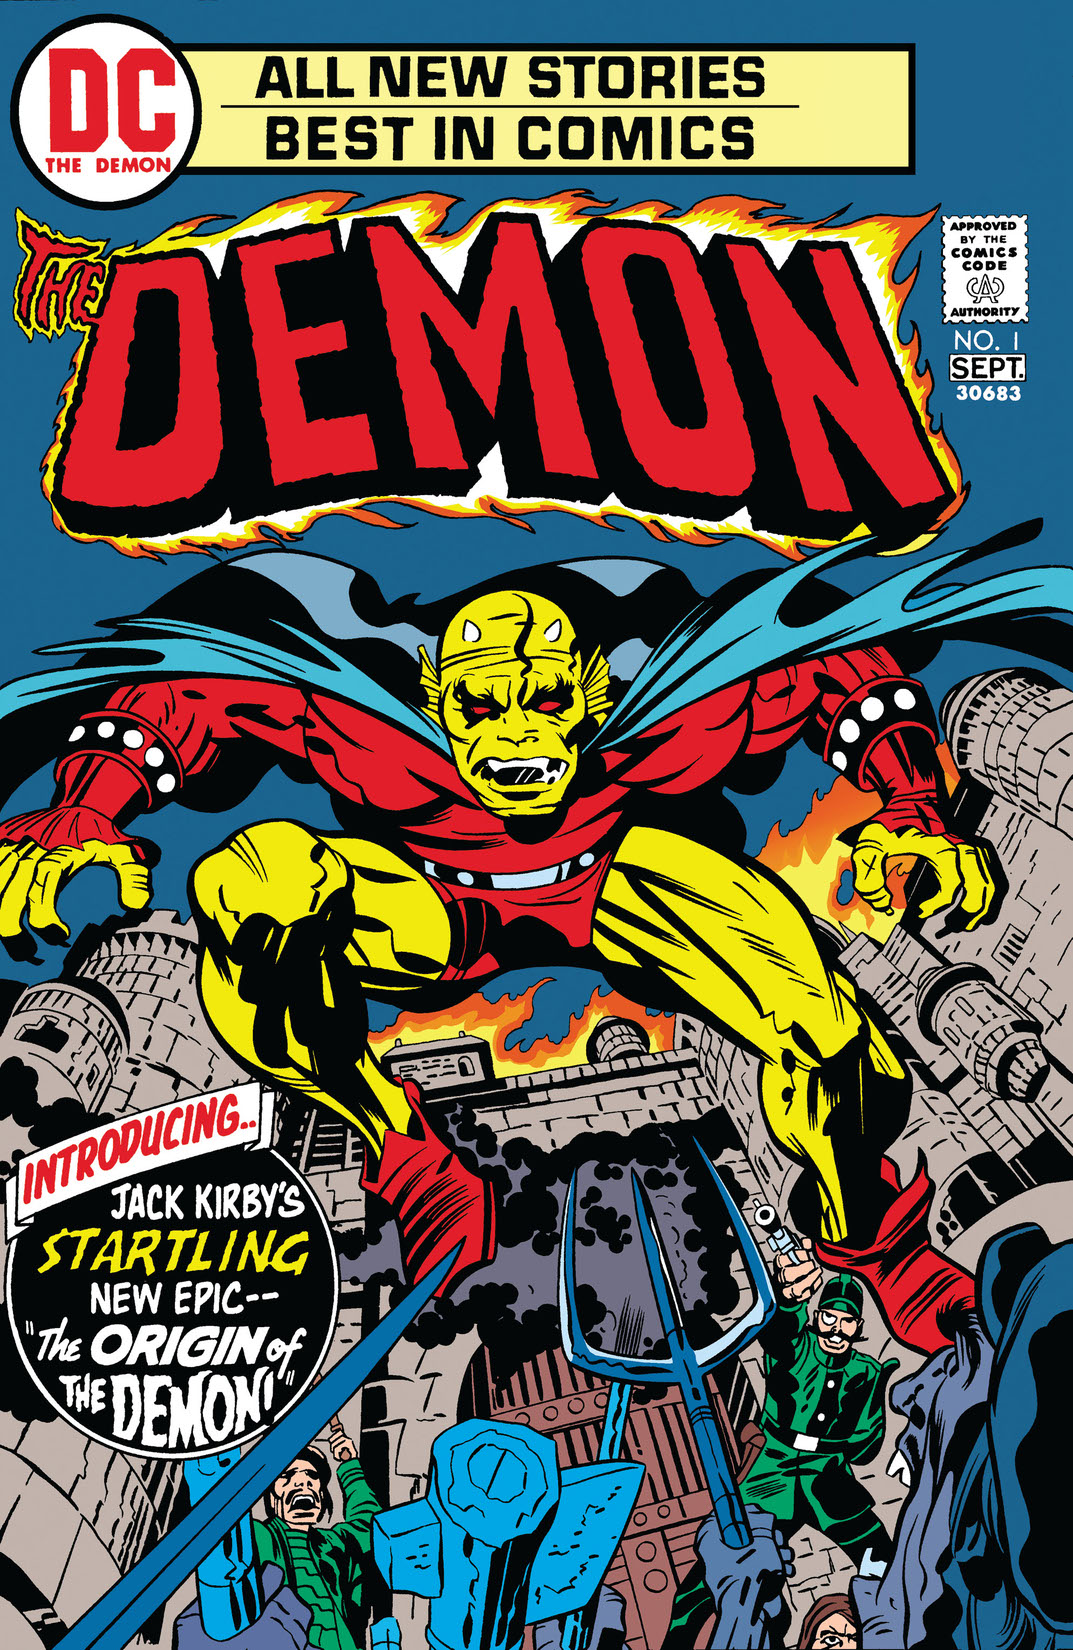 The Demon (1972-) #1 preview images